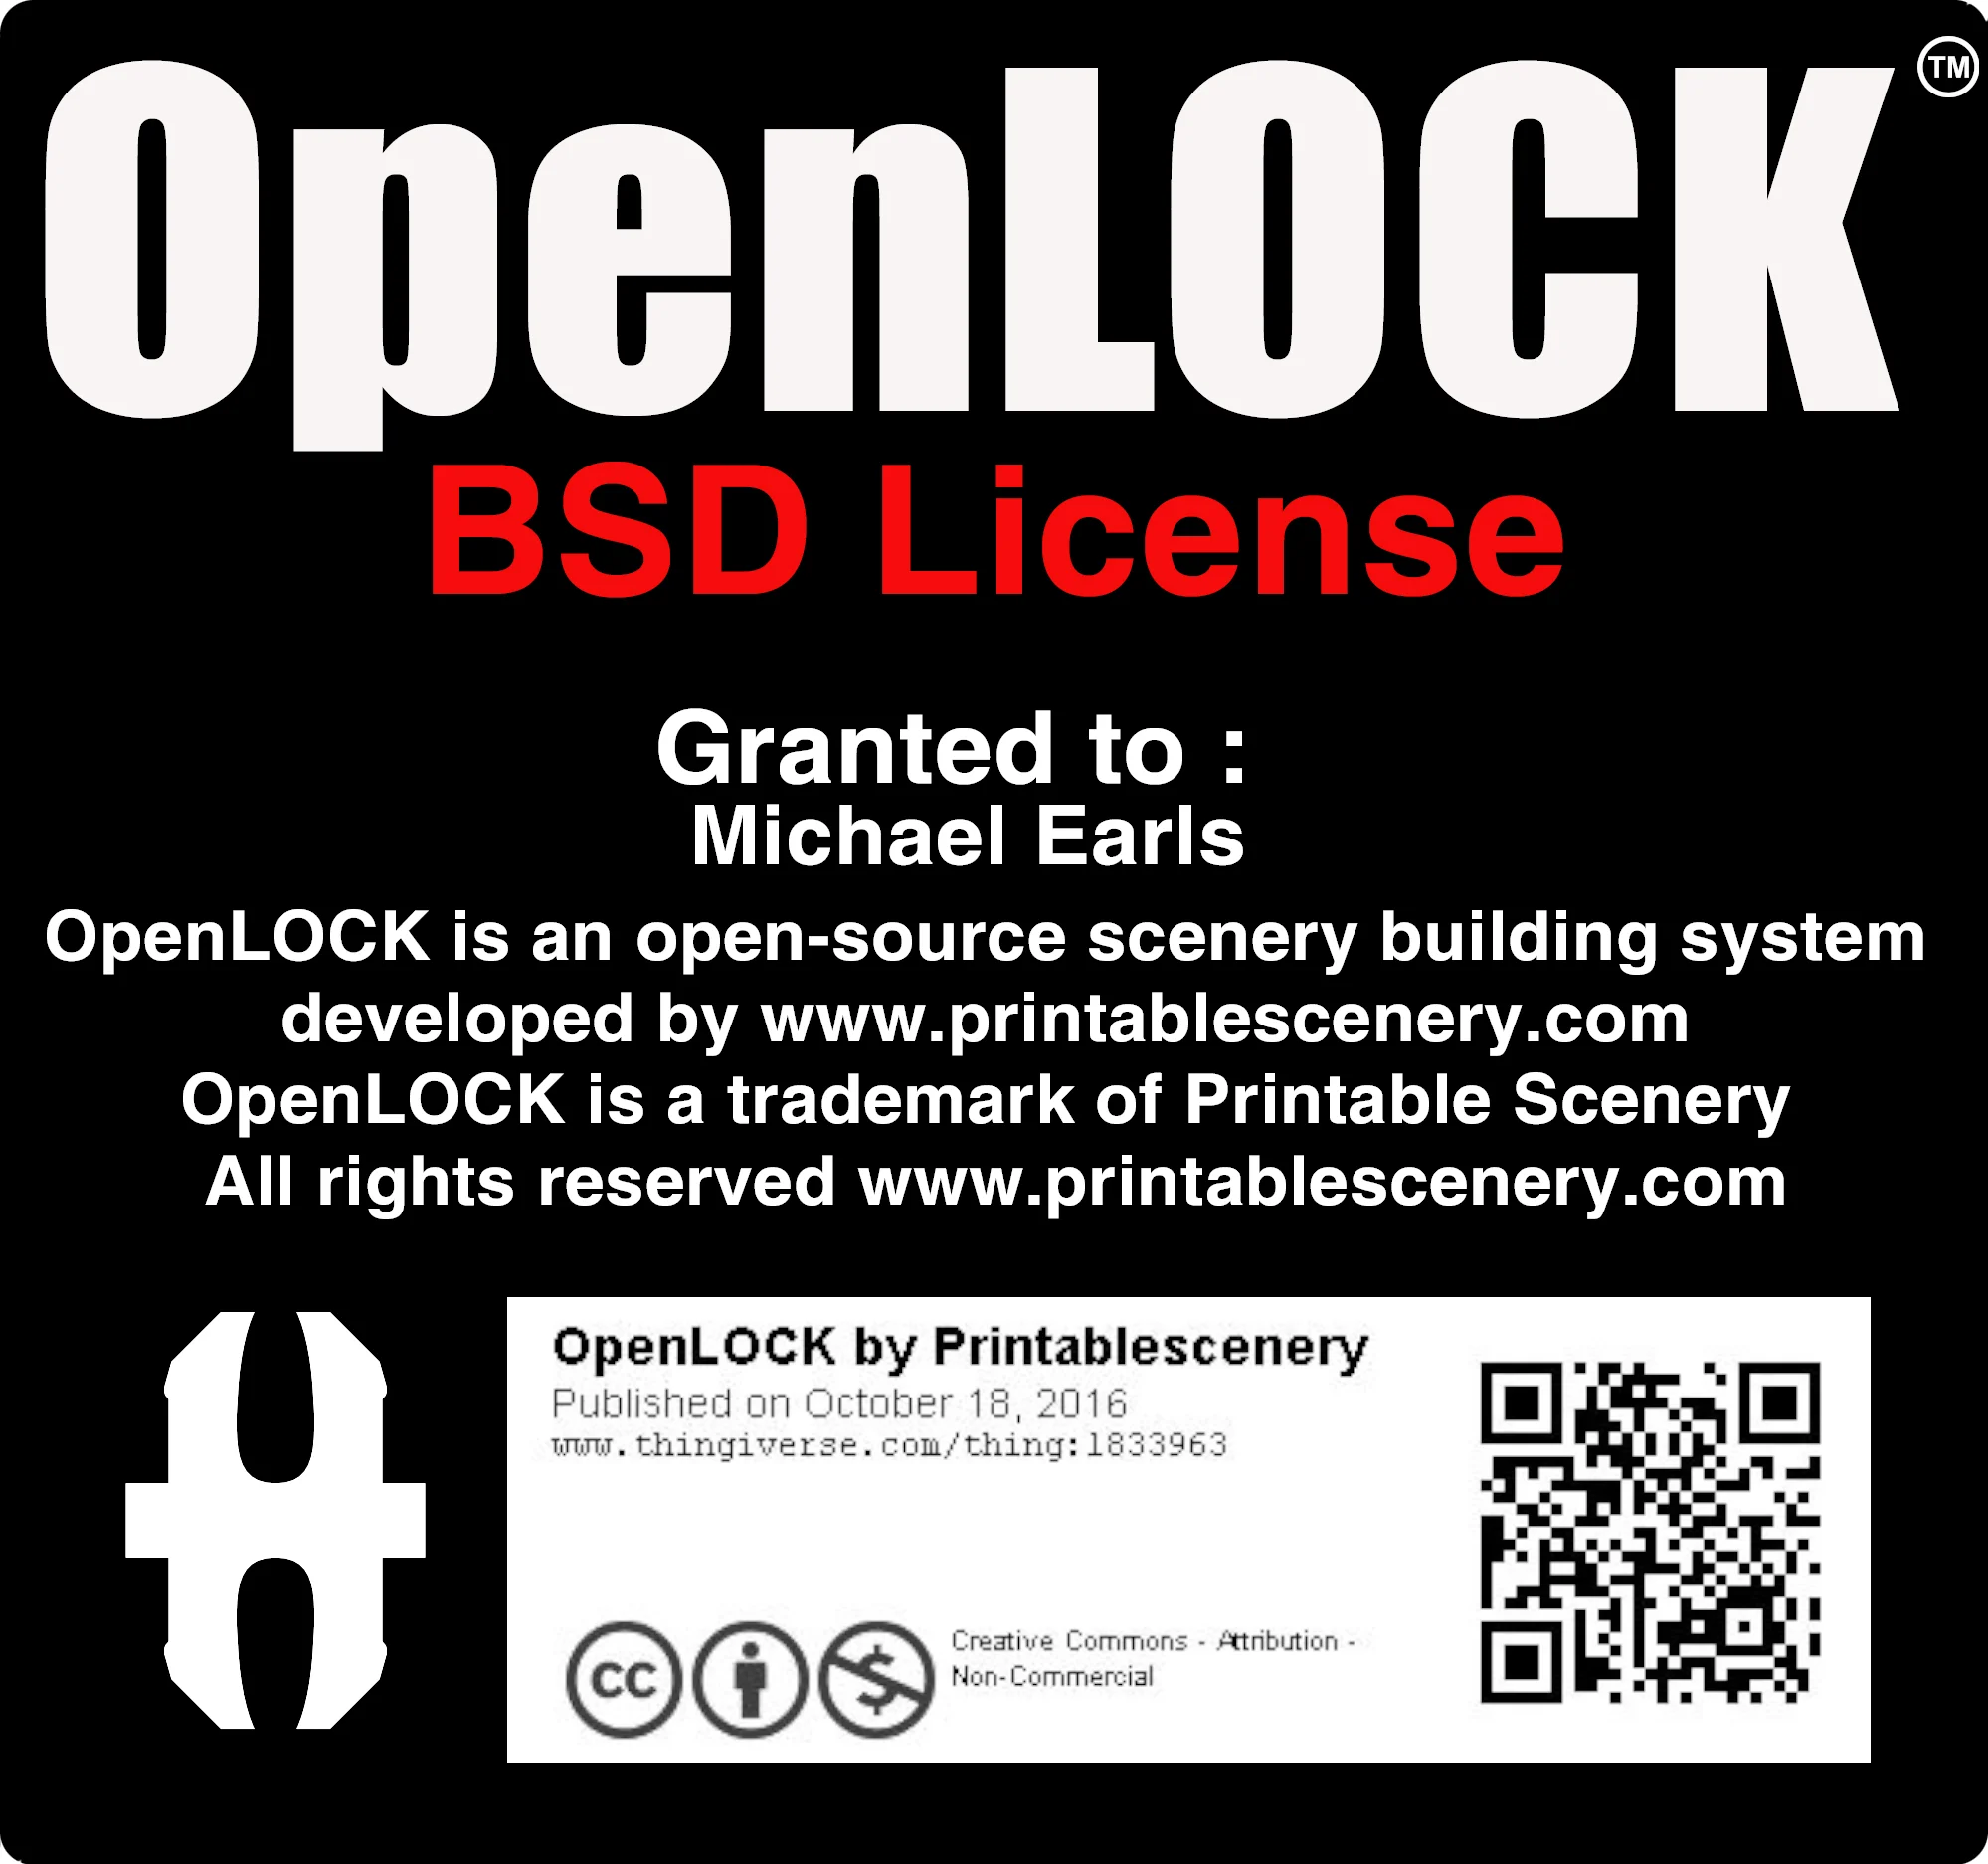 OpenLock Licensed Granted to Michael Earls